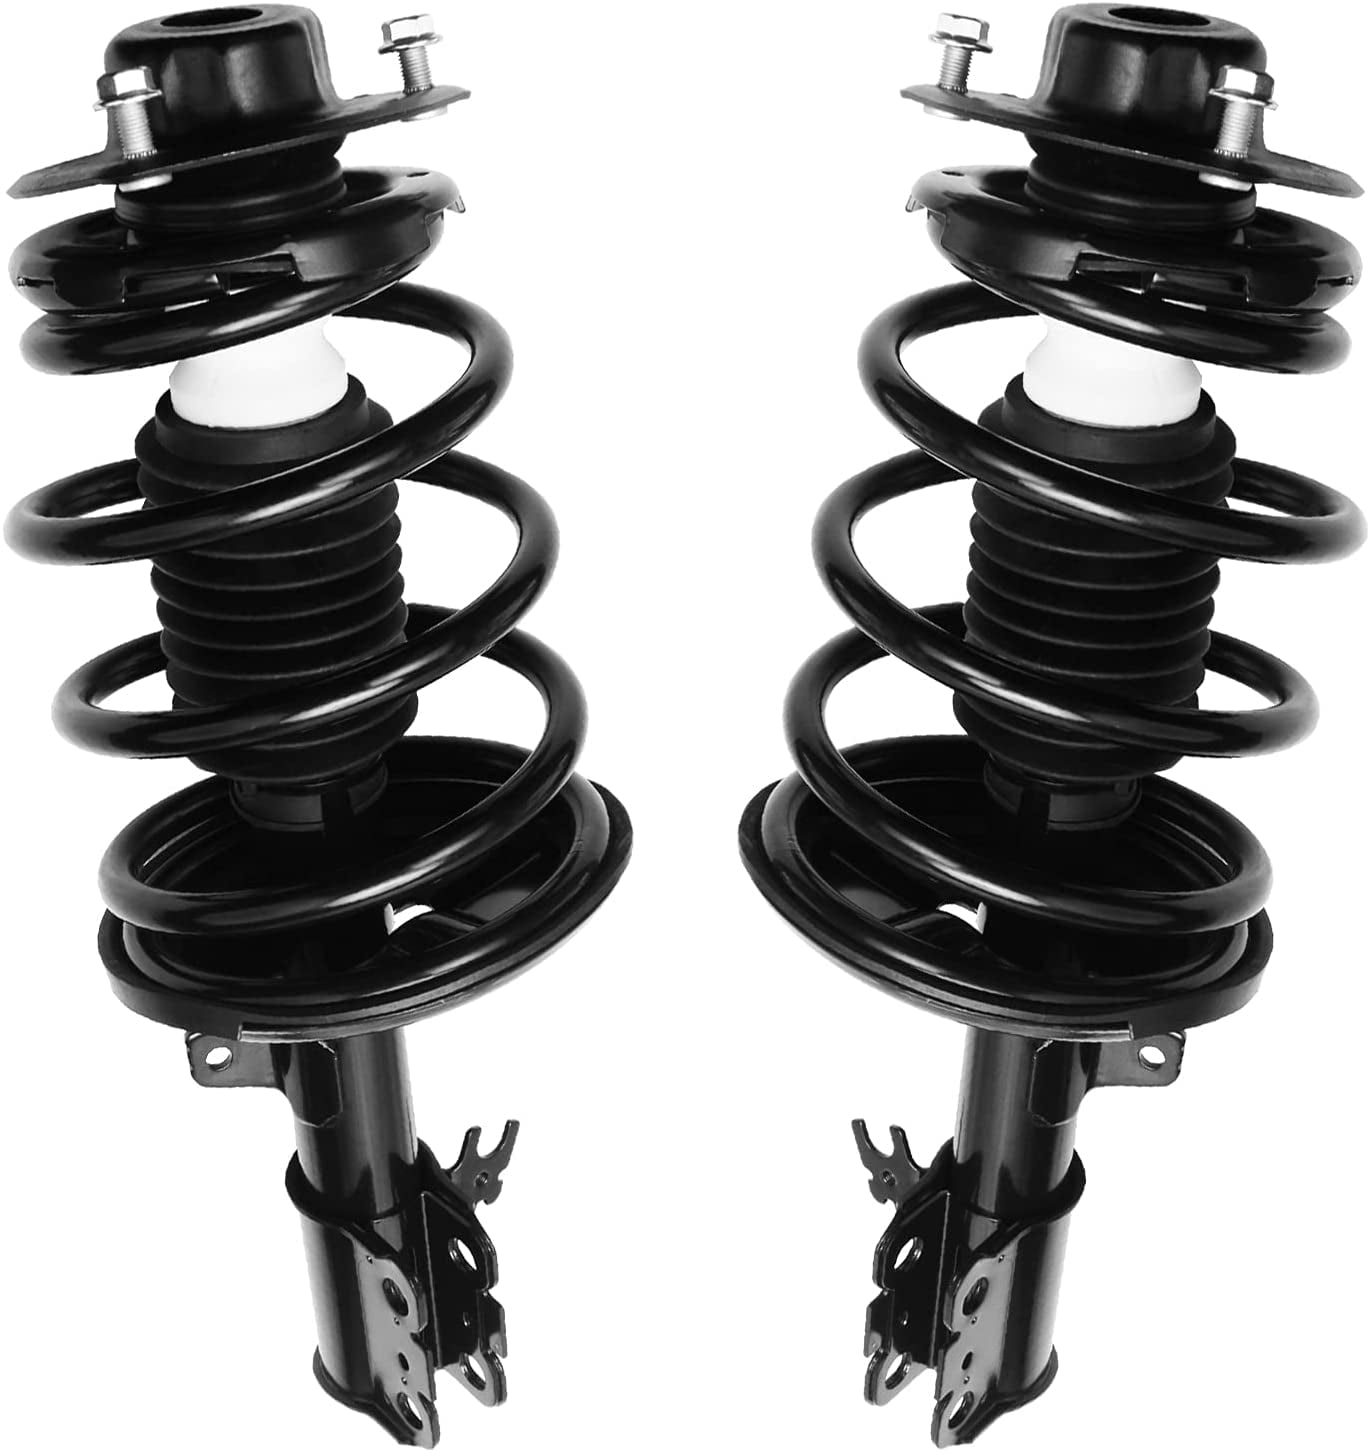 2 2002-2003 Lexus ES300 Models Without Adaptive Variable Suspension Both Detroit Axle Front New Front Left & Right Side Complete Strut & Spring Assembly for 2002 2003 Toyota Camry 